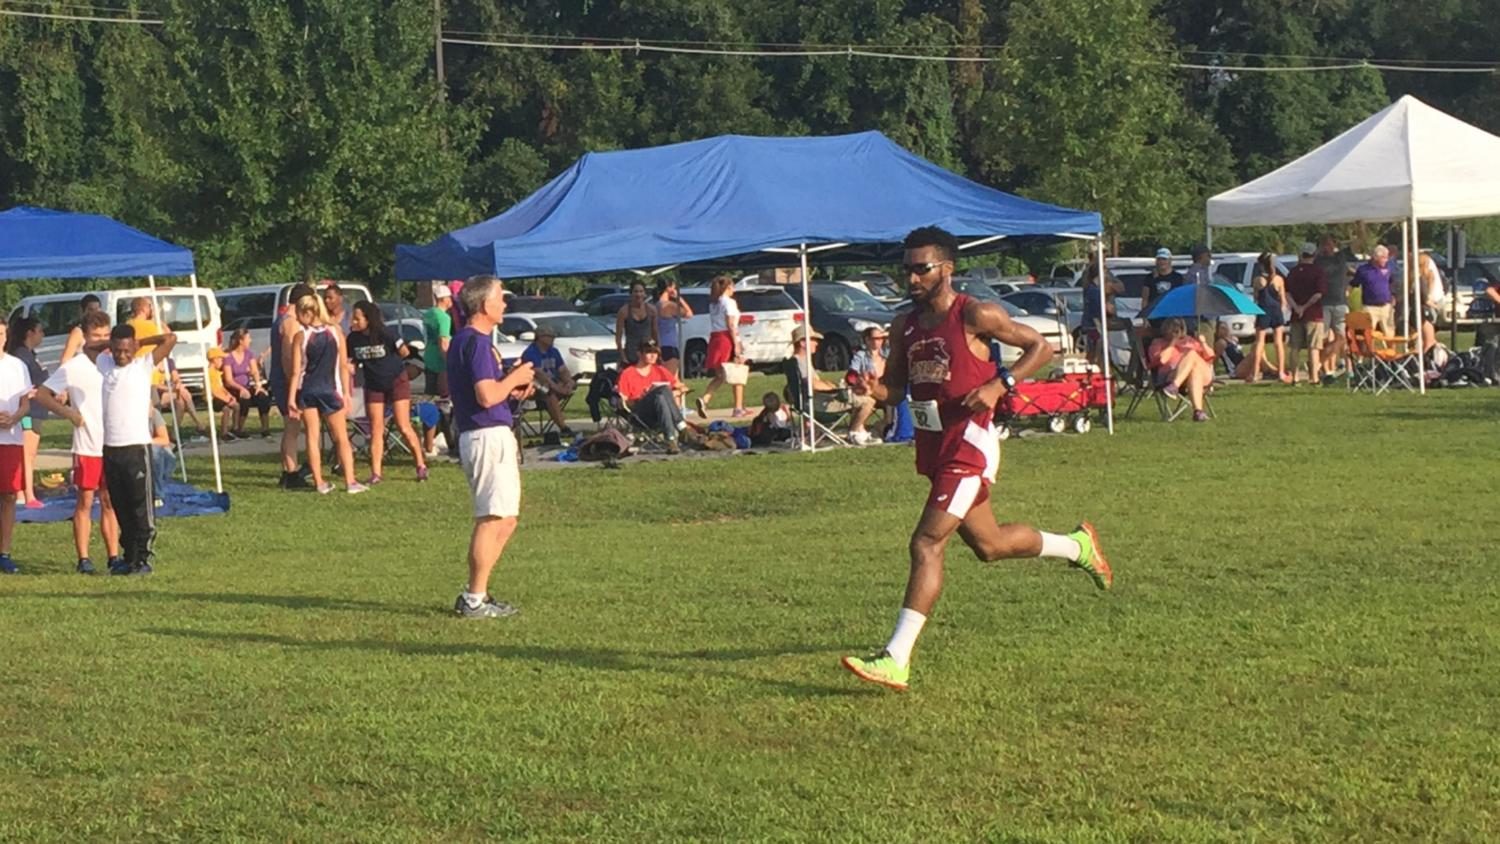 Cross country runner Brian Davis competes at the LSU Cross Country Festival on Sept. 16, 2017. The Loyola cross country team finished 7th overall at the event. Photo credit: Jc Canicosa